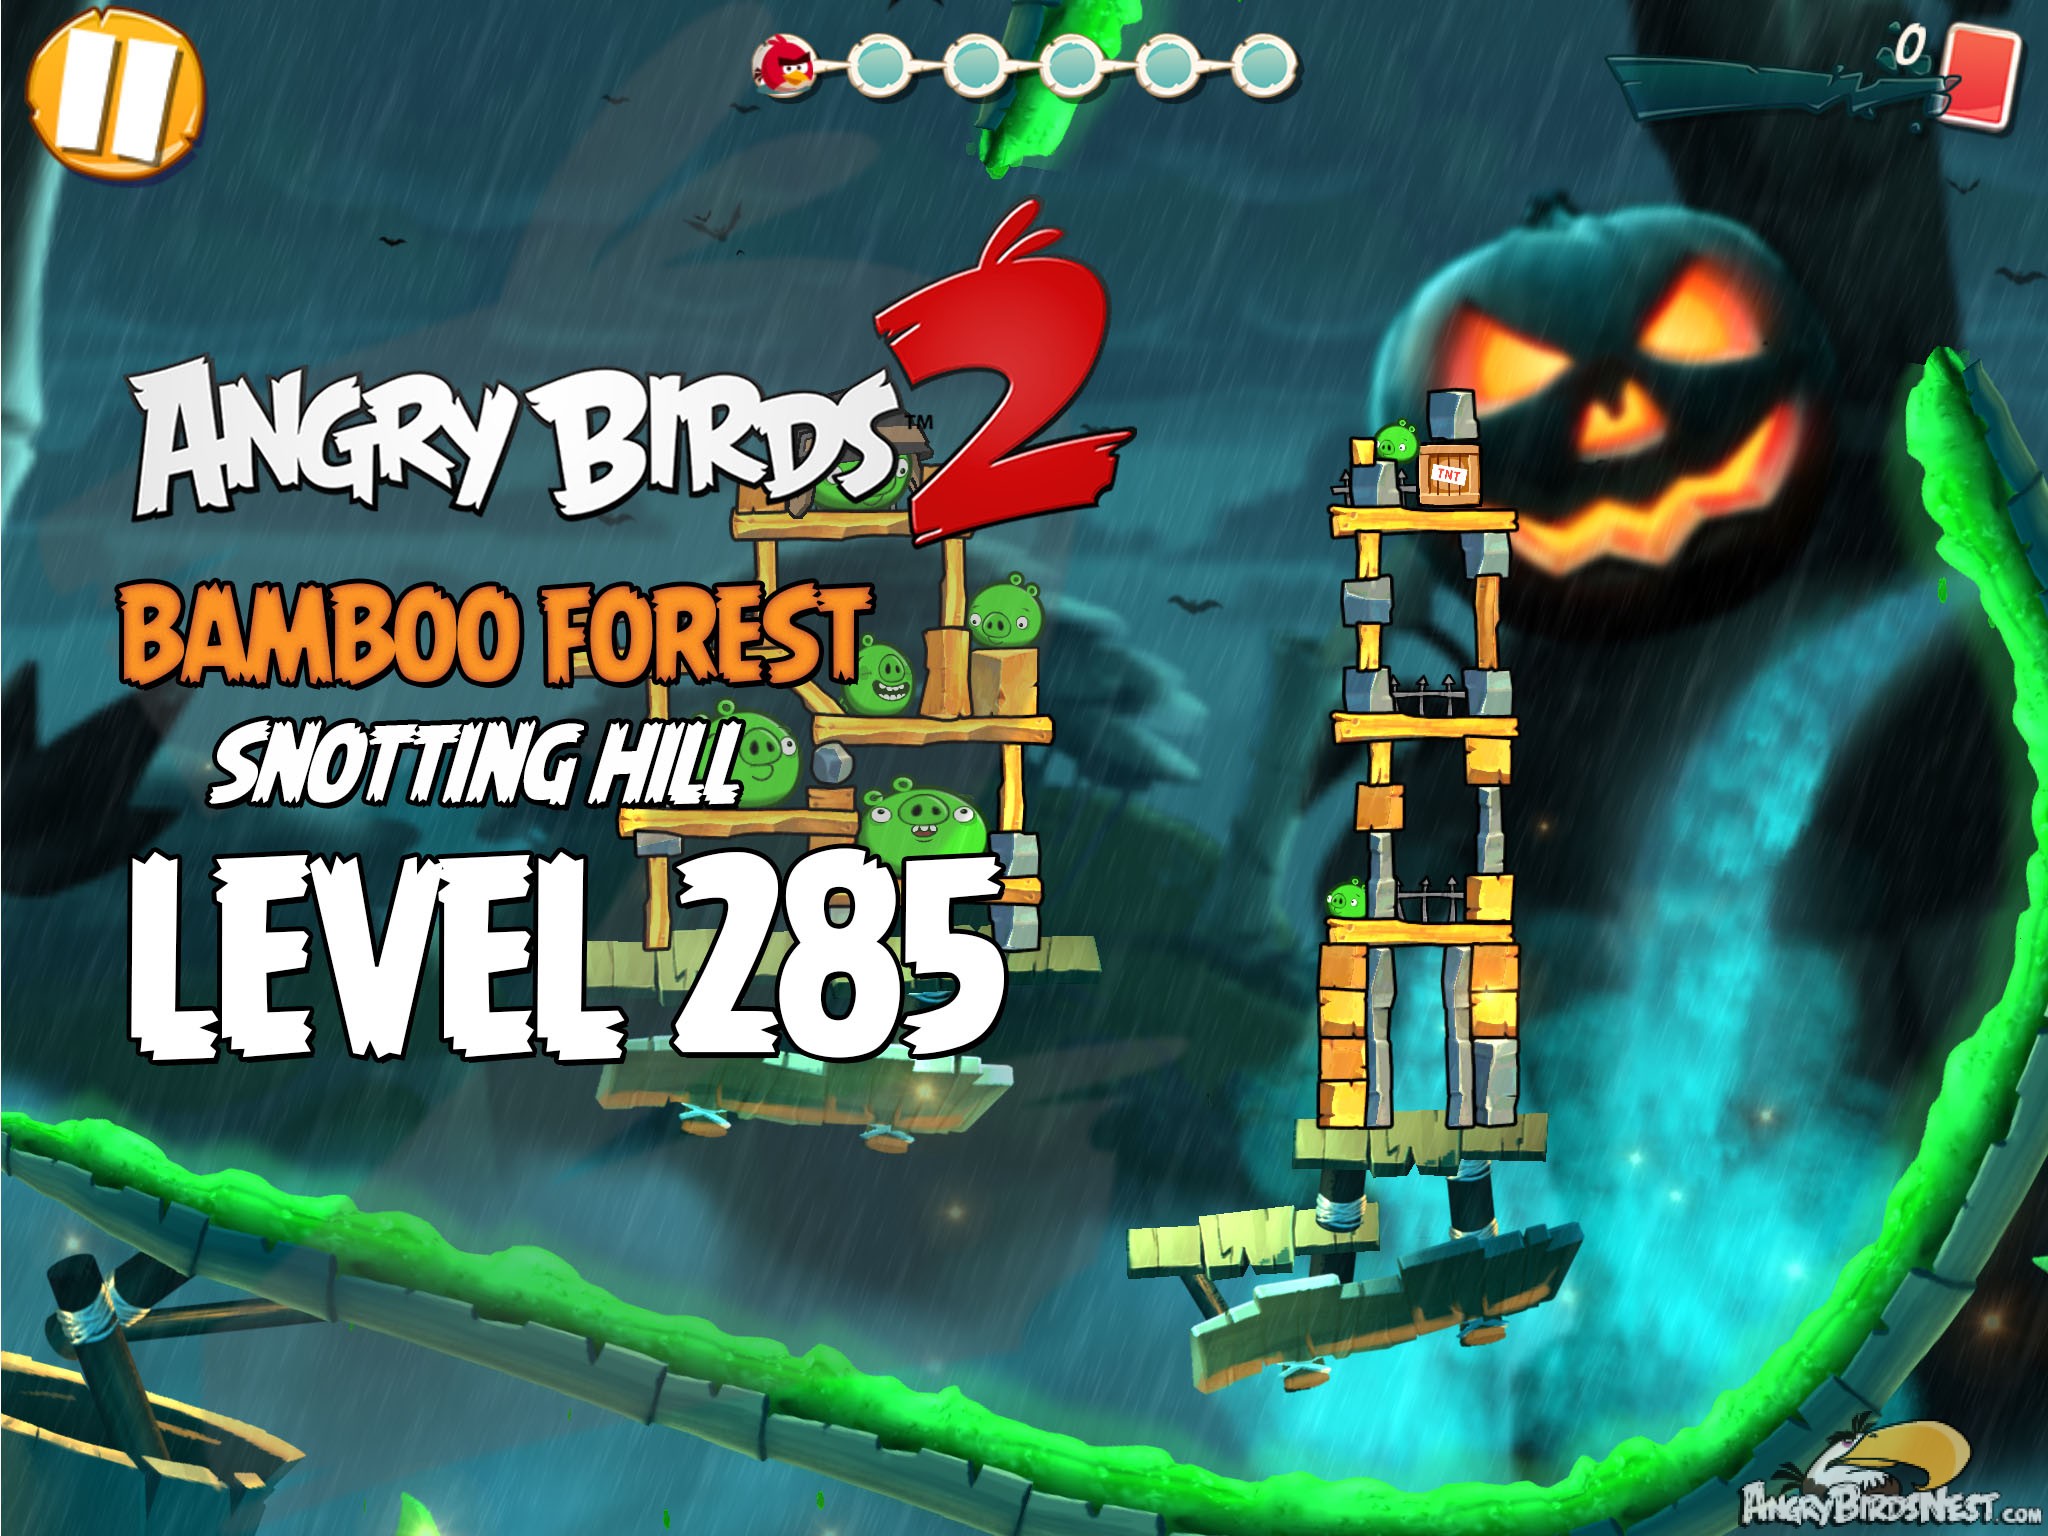 Angry Birds 2 Bambbo Forest Snotting Hill Level 285